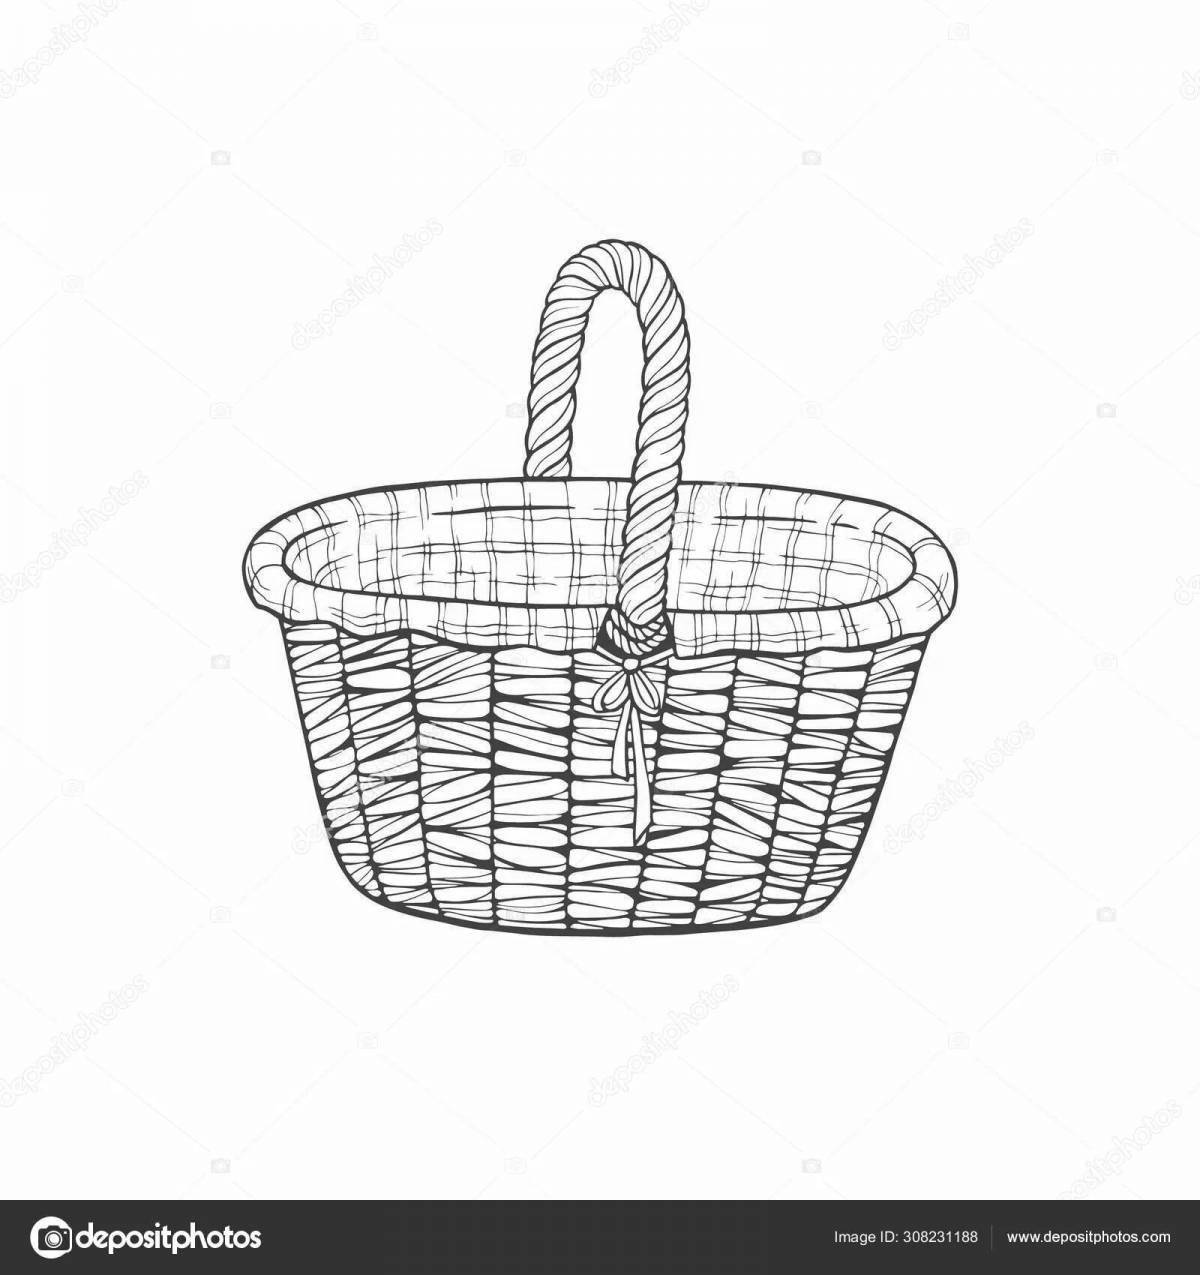 Children's empty basket coloring book for kids